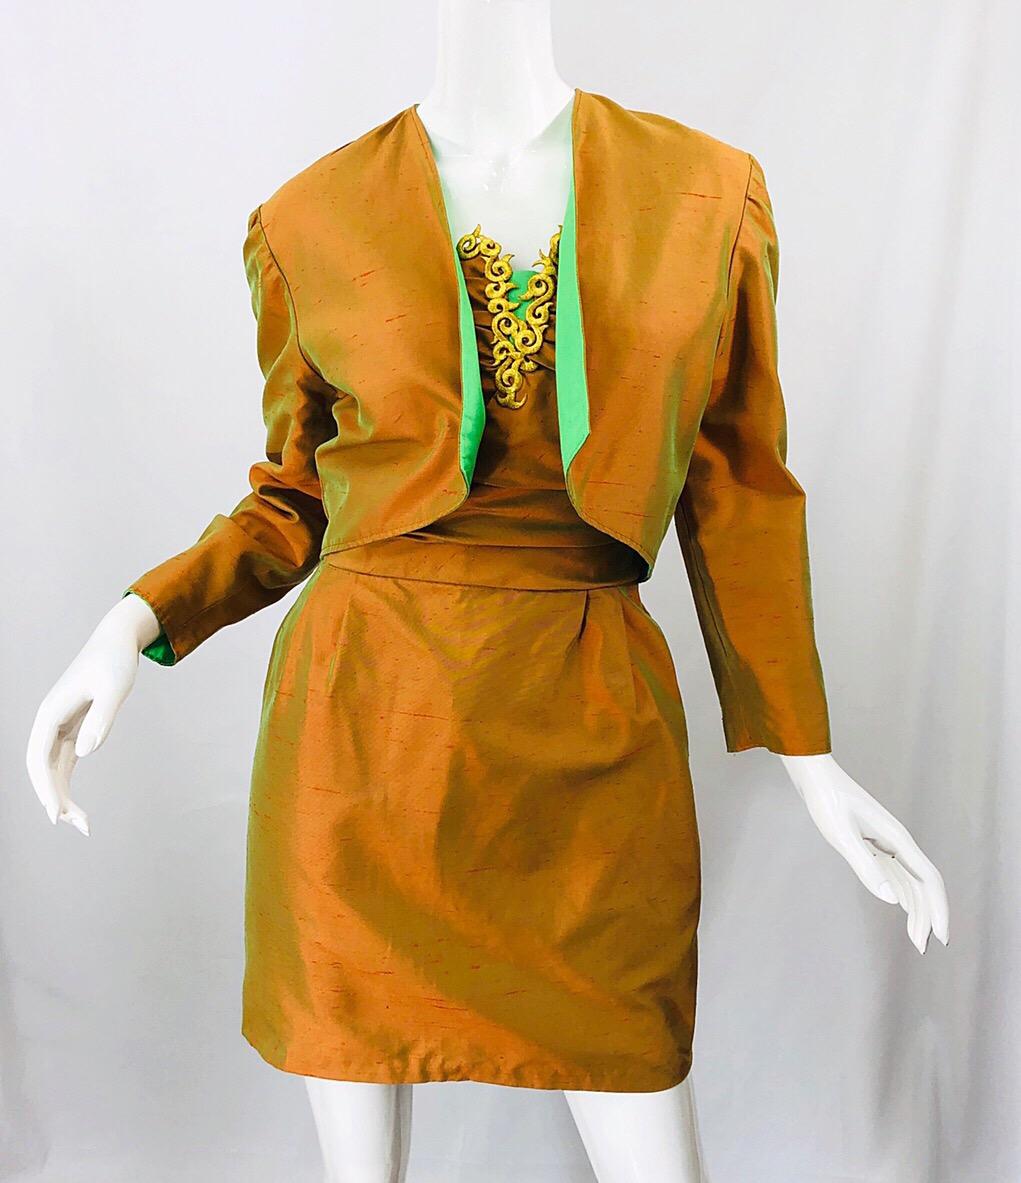 Beautiful 1990s orange metallic strapless dress and matching reversible cropped bolero jacket! Strapless mini dress features a fitted bodice with a forgiving skirt. Gold embroidery along the bust with a pop of green at center bust to match the